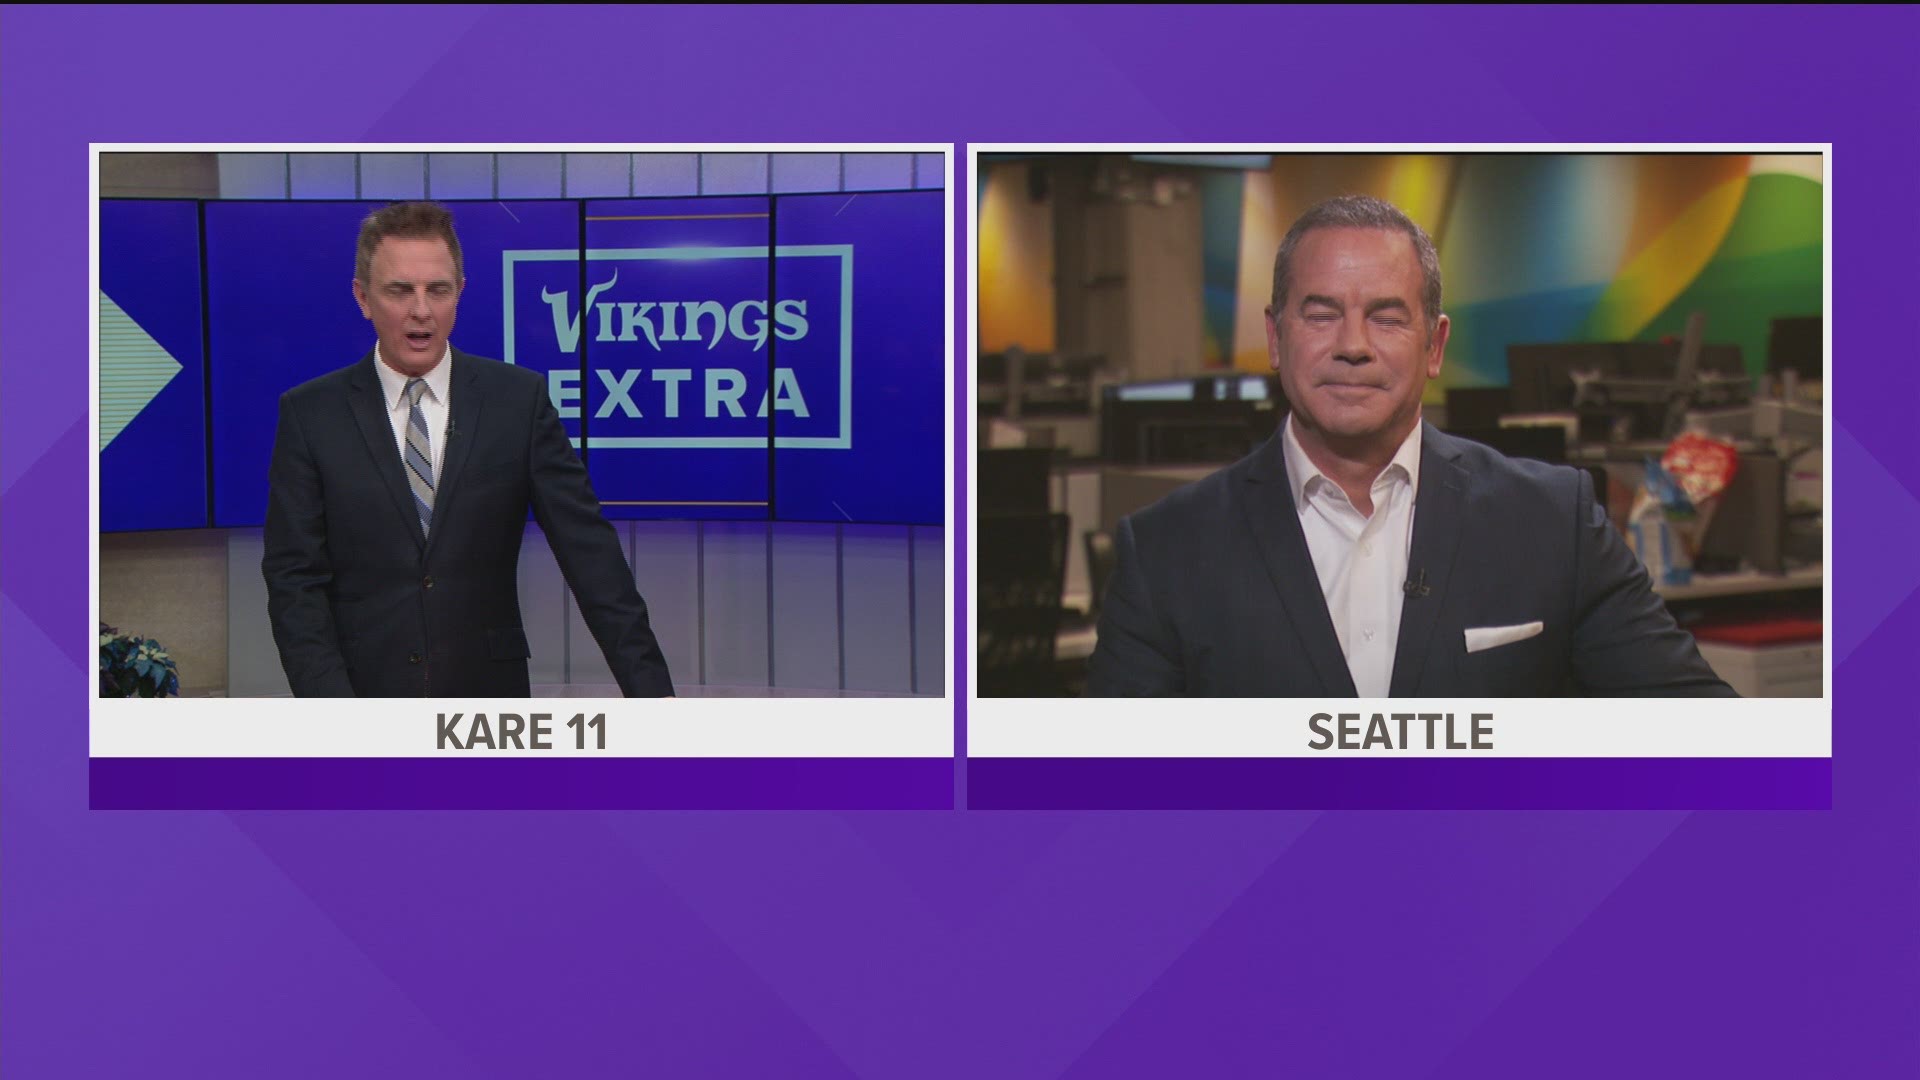 Sports director Eric Perkins breaks down Monday night's match-up between the Vikings and Seahawks with KING-TV (Seattle) anchor Paul Silvi.